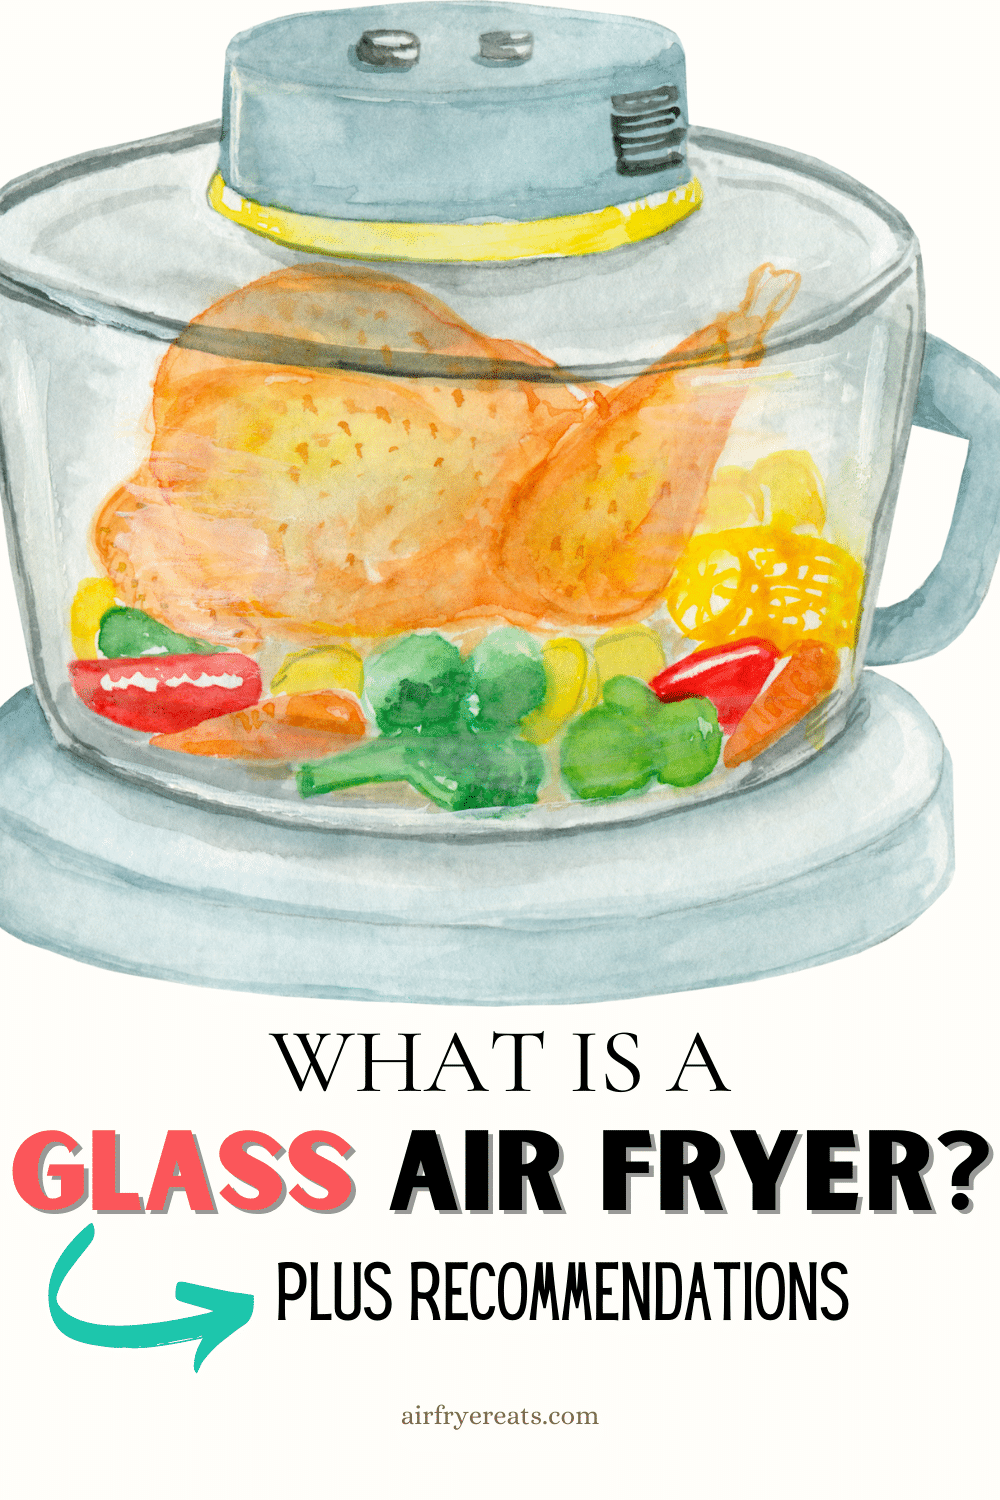 Looking for the right GLASS AIR FRYER for your home? We share why Glass Air Fryers are great and which models you should check out. via @vegetarianmamma